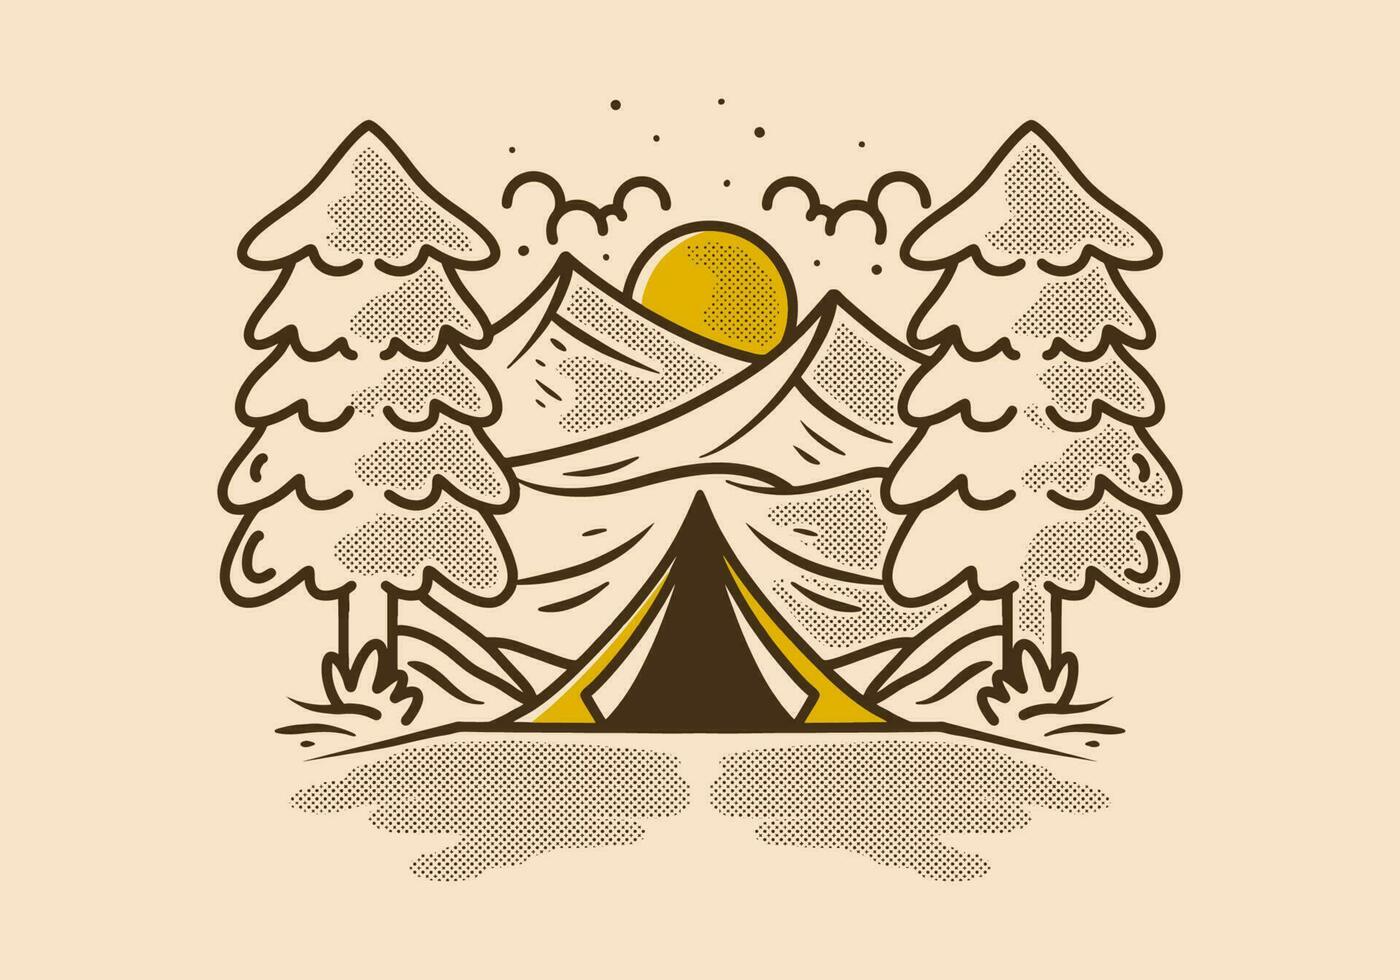 Triangle camping tent between two big pine trees design vector